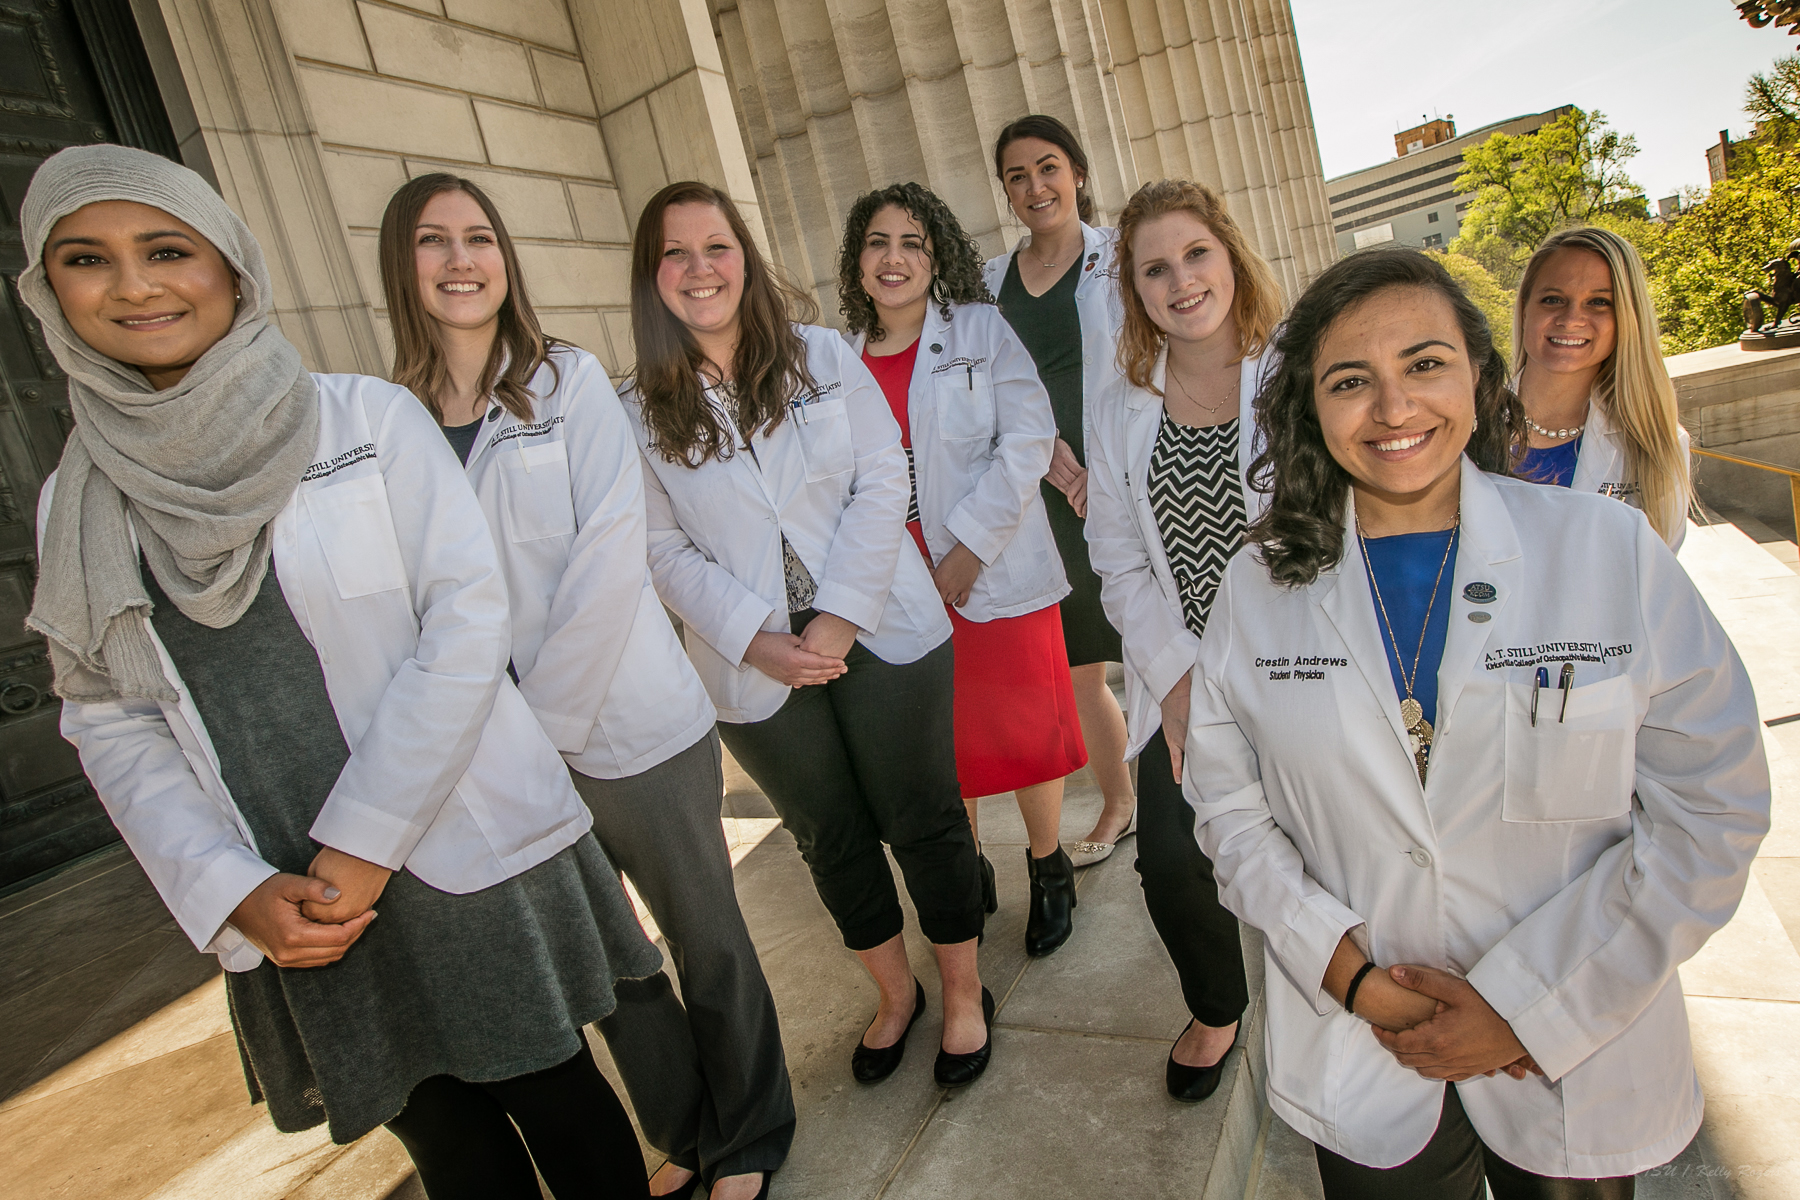 Students from ATSU-KCOM participate in Missouri Osteopathic Medicine Awareness Day at the state Capitol in Jefferson City.